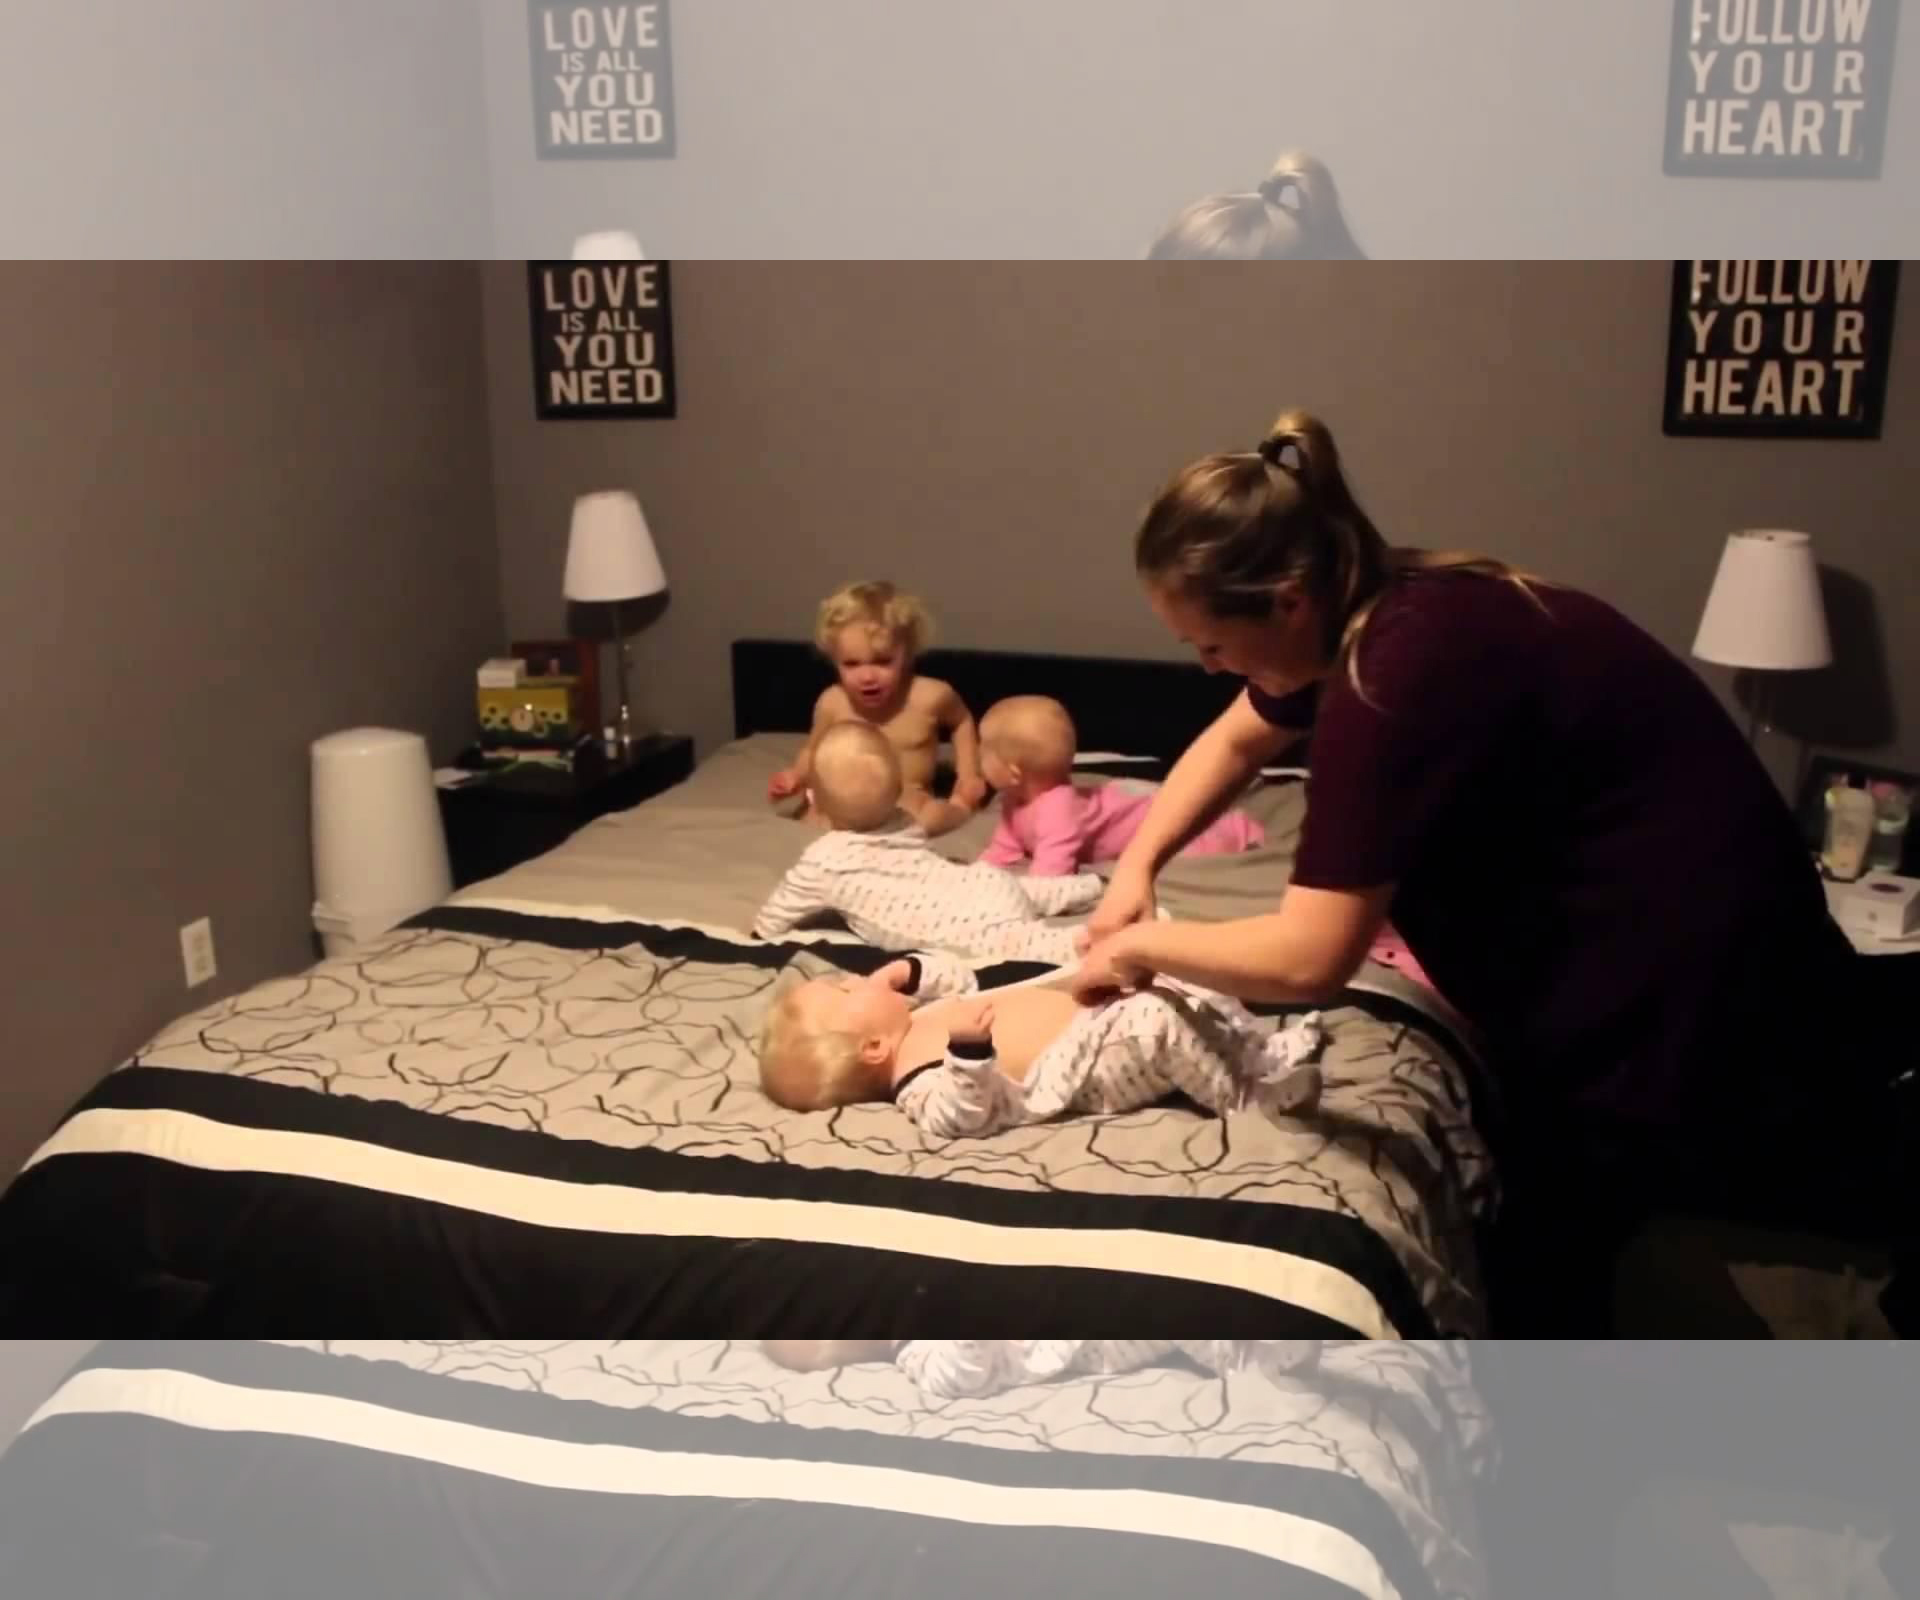 Super mum vs. triplets and toddler video goes viral